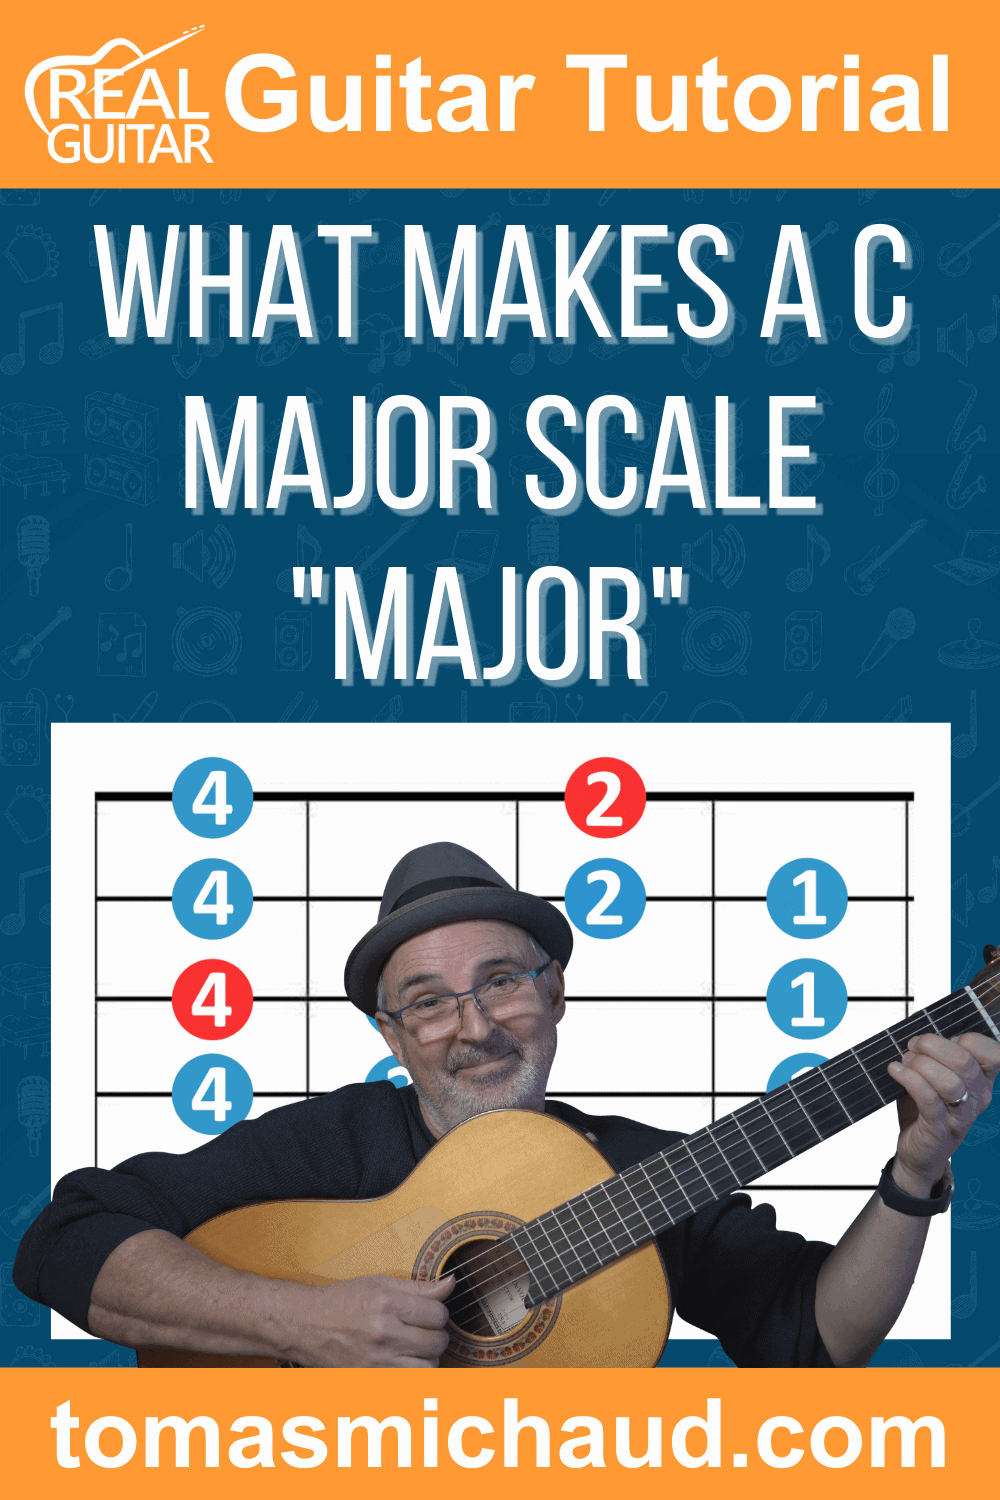 What Makes a Major Scale "Major"